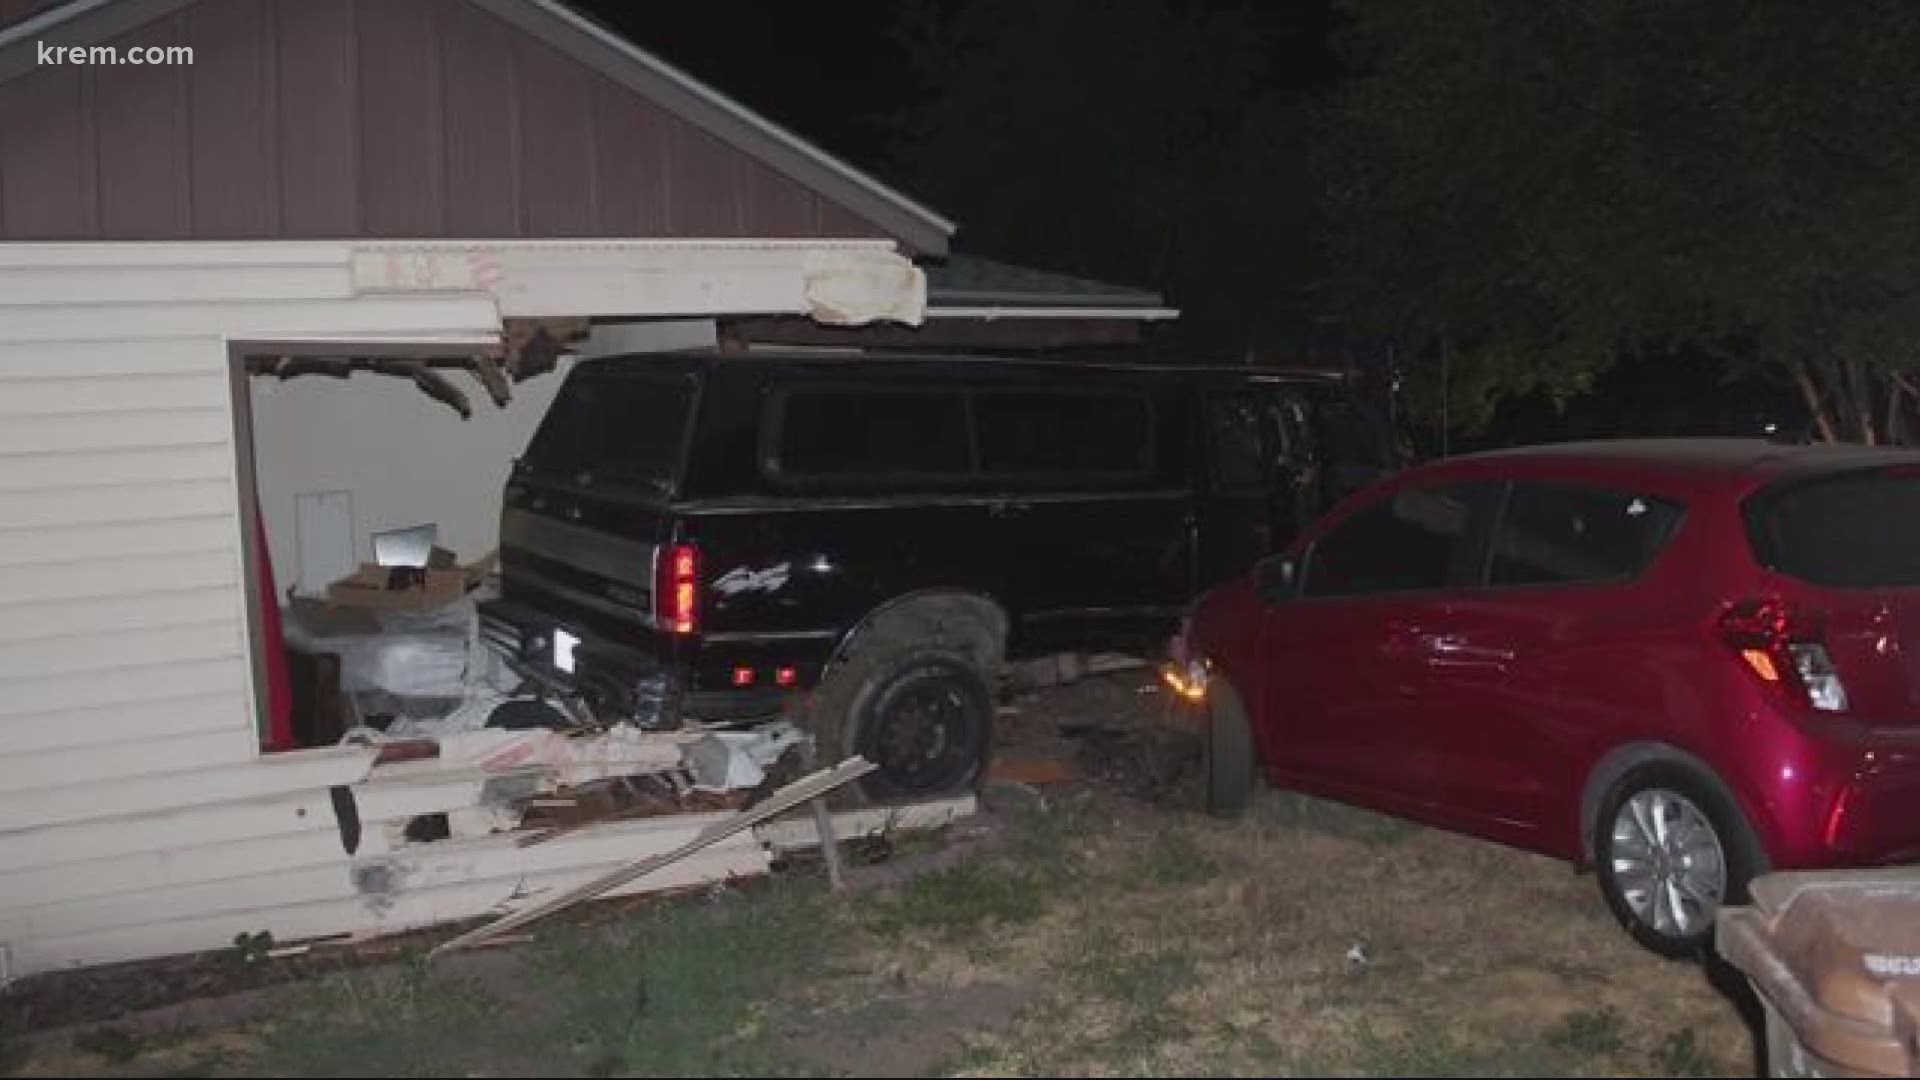 A driver was arrested for driving under the influence after crashing into the bedroom of a Spokane home, on top of a bed where two people were sleeping.